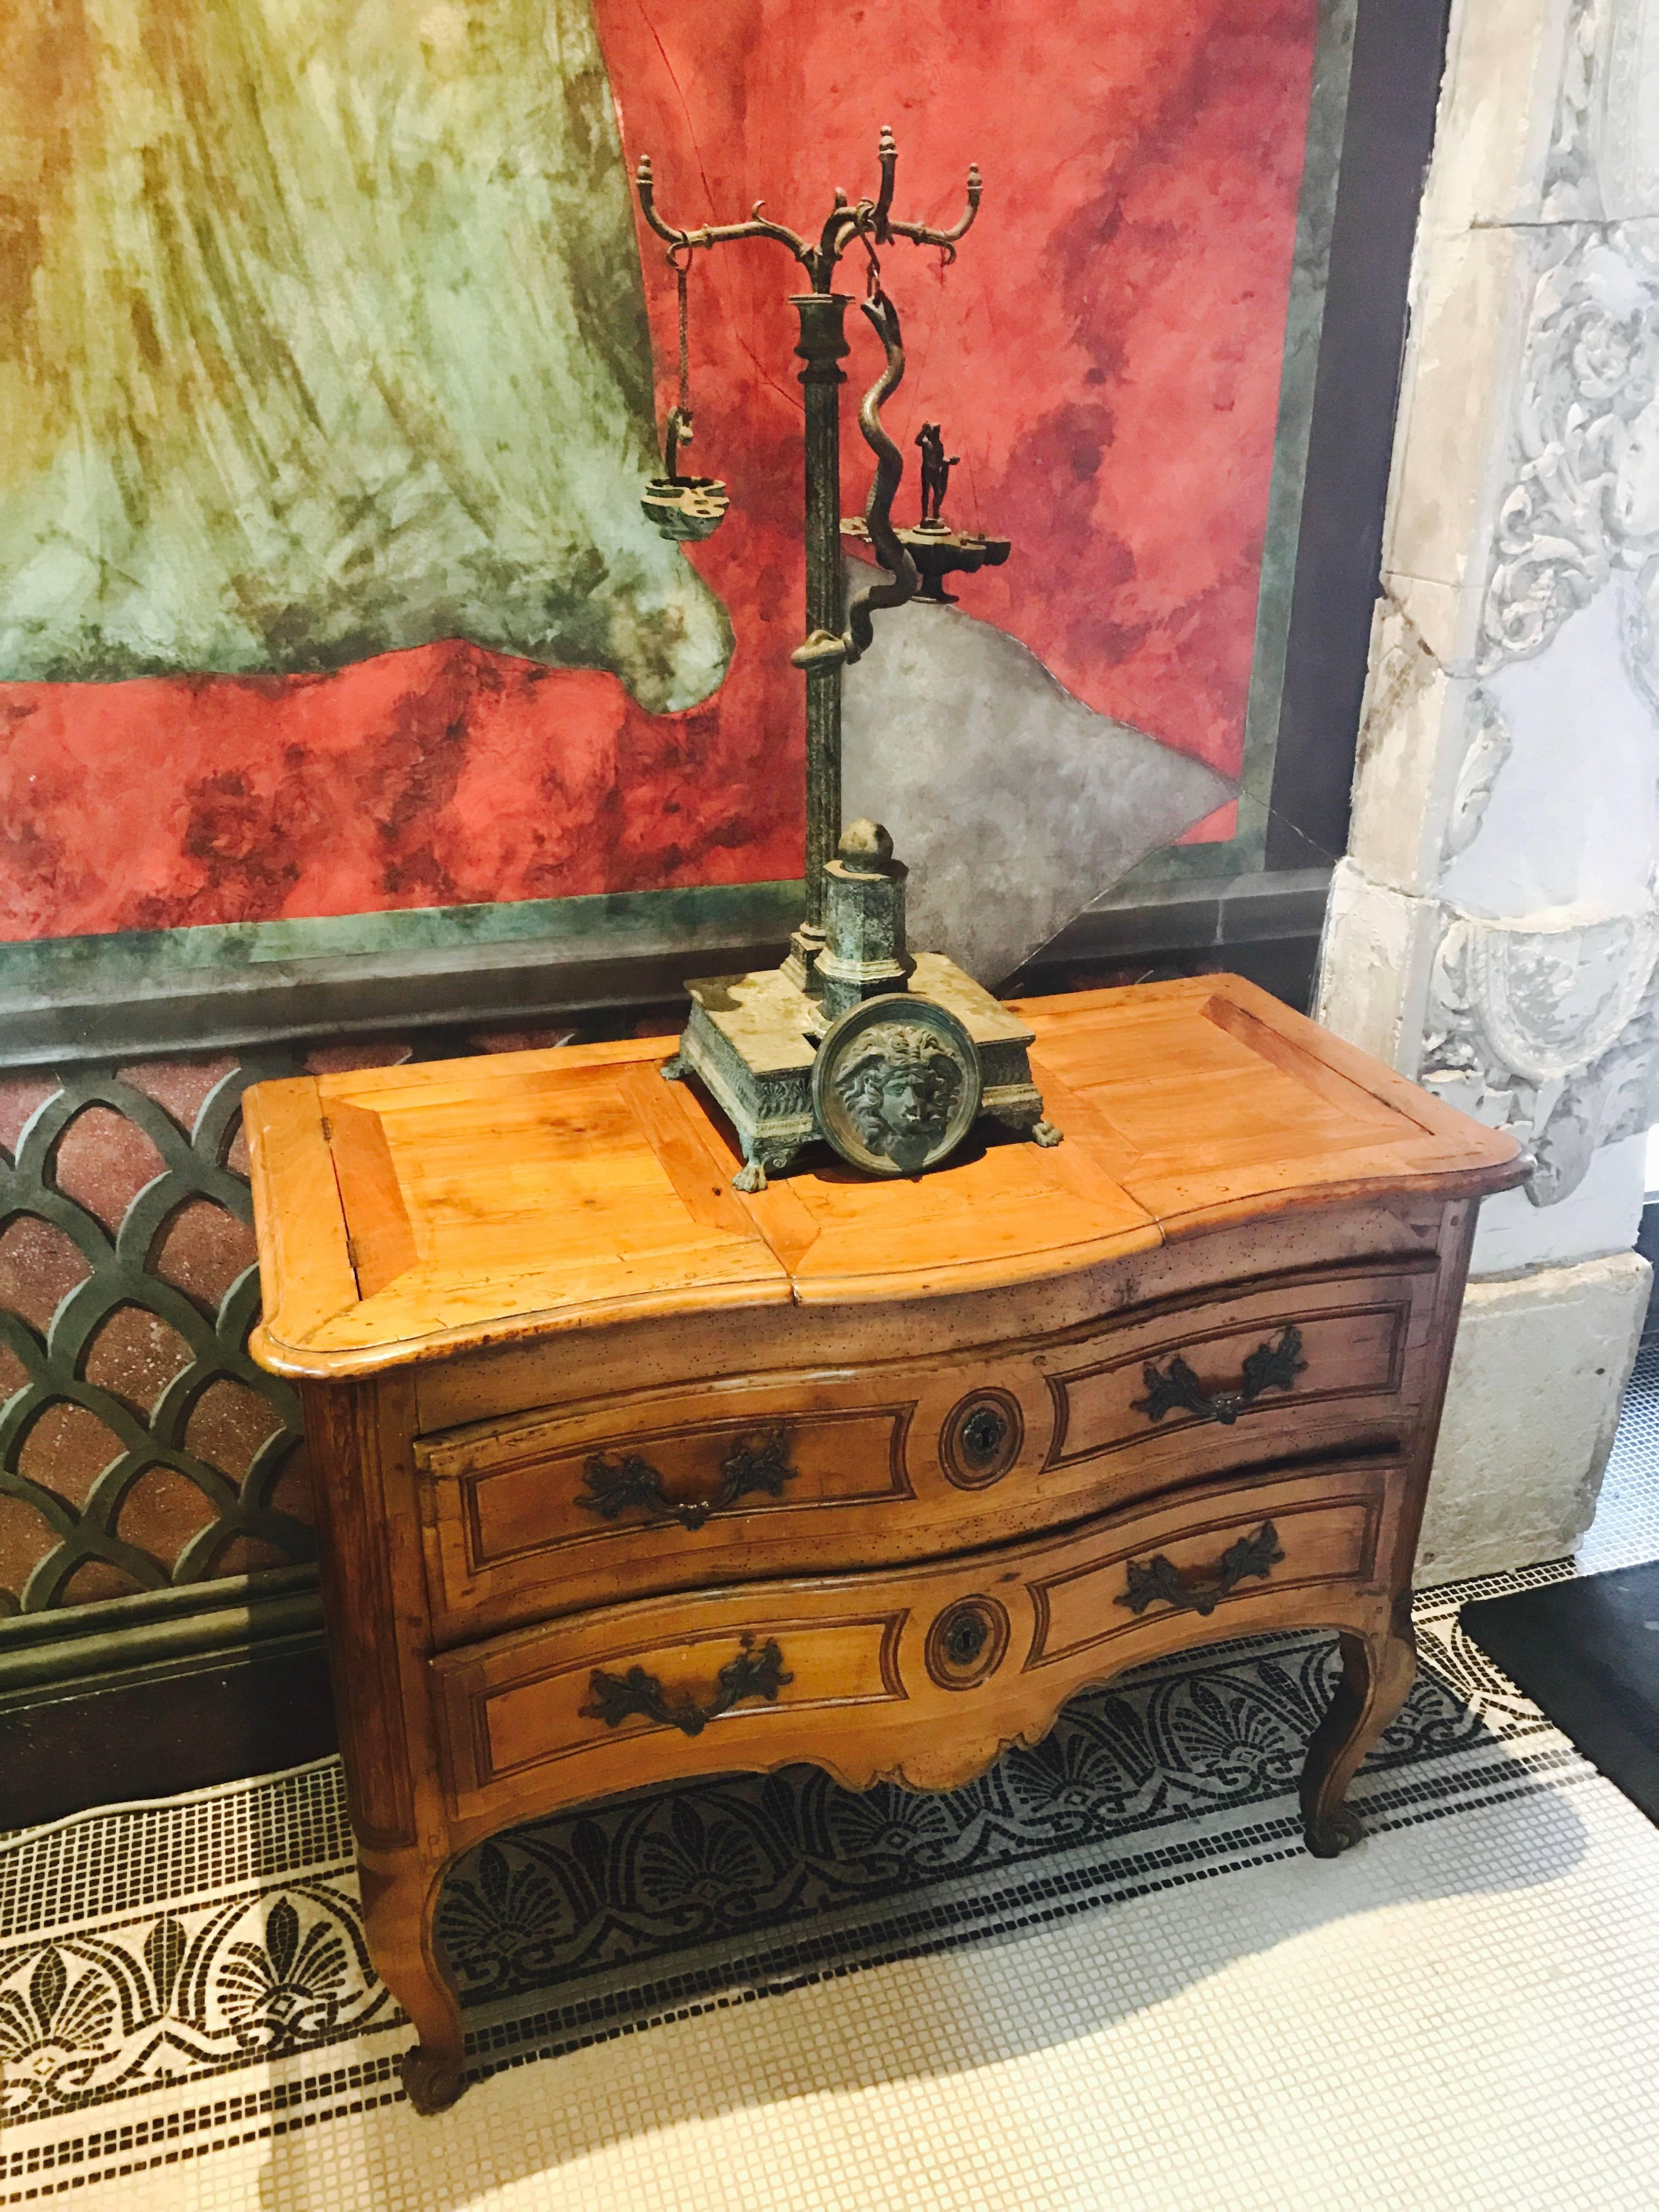 Here is a very rare example of a oil-burning table lamp that was taken from a Pompeiian Original. The workmanship and Patina fool the eye, since it is a true representation of a buried treasure 2000 years old.
At the turn of the century Andrew